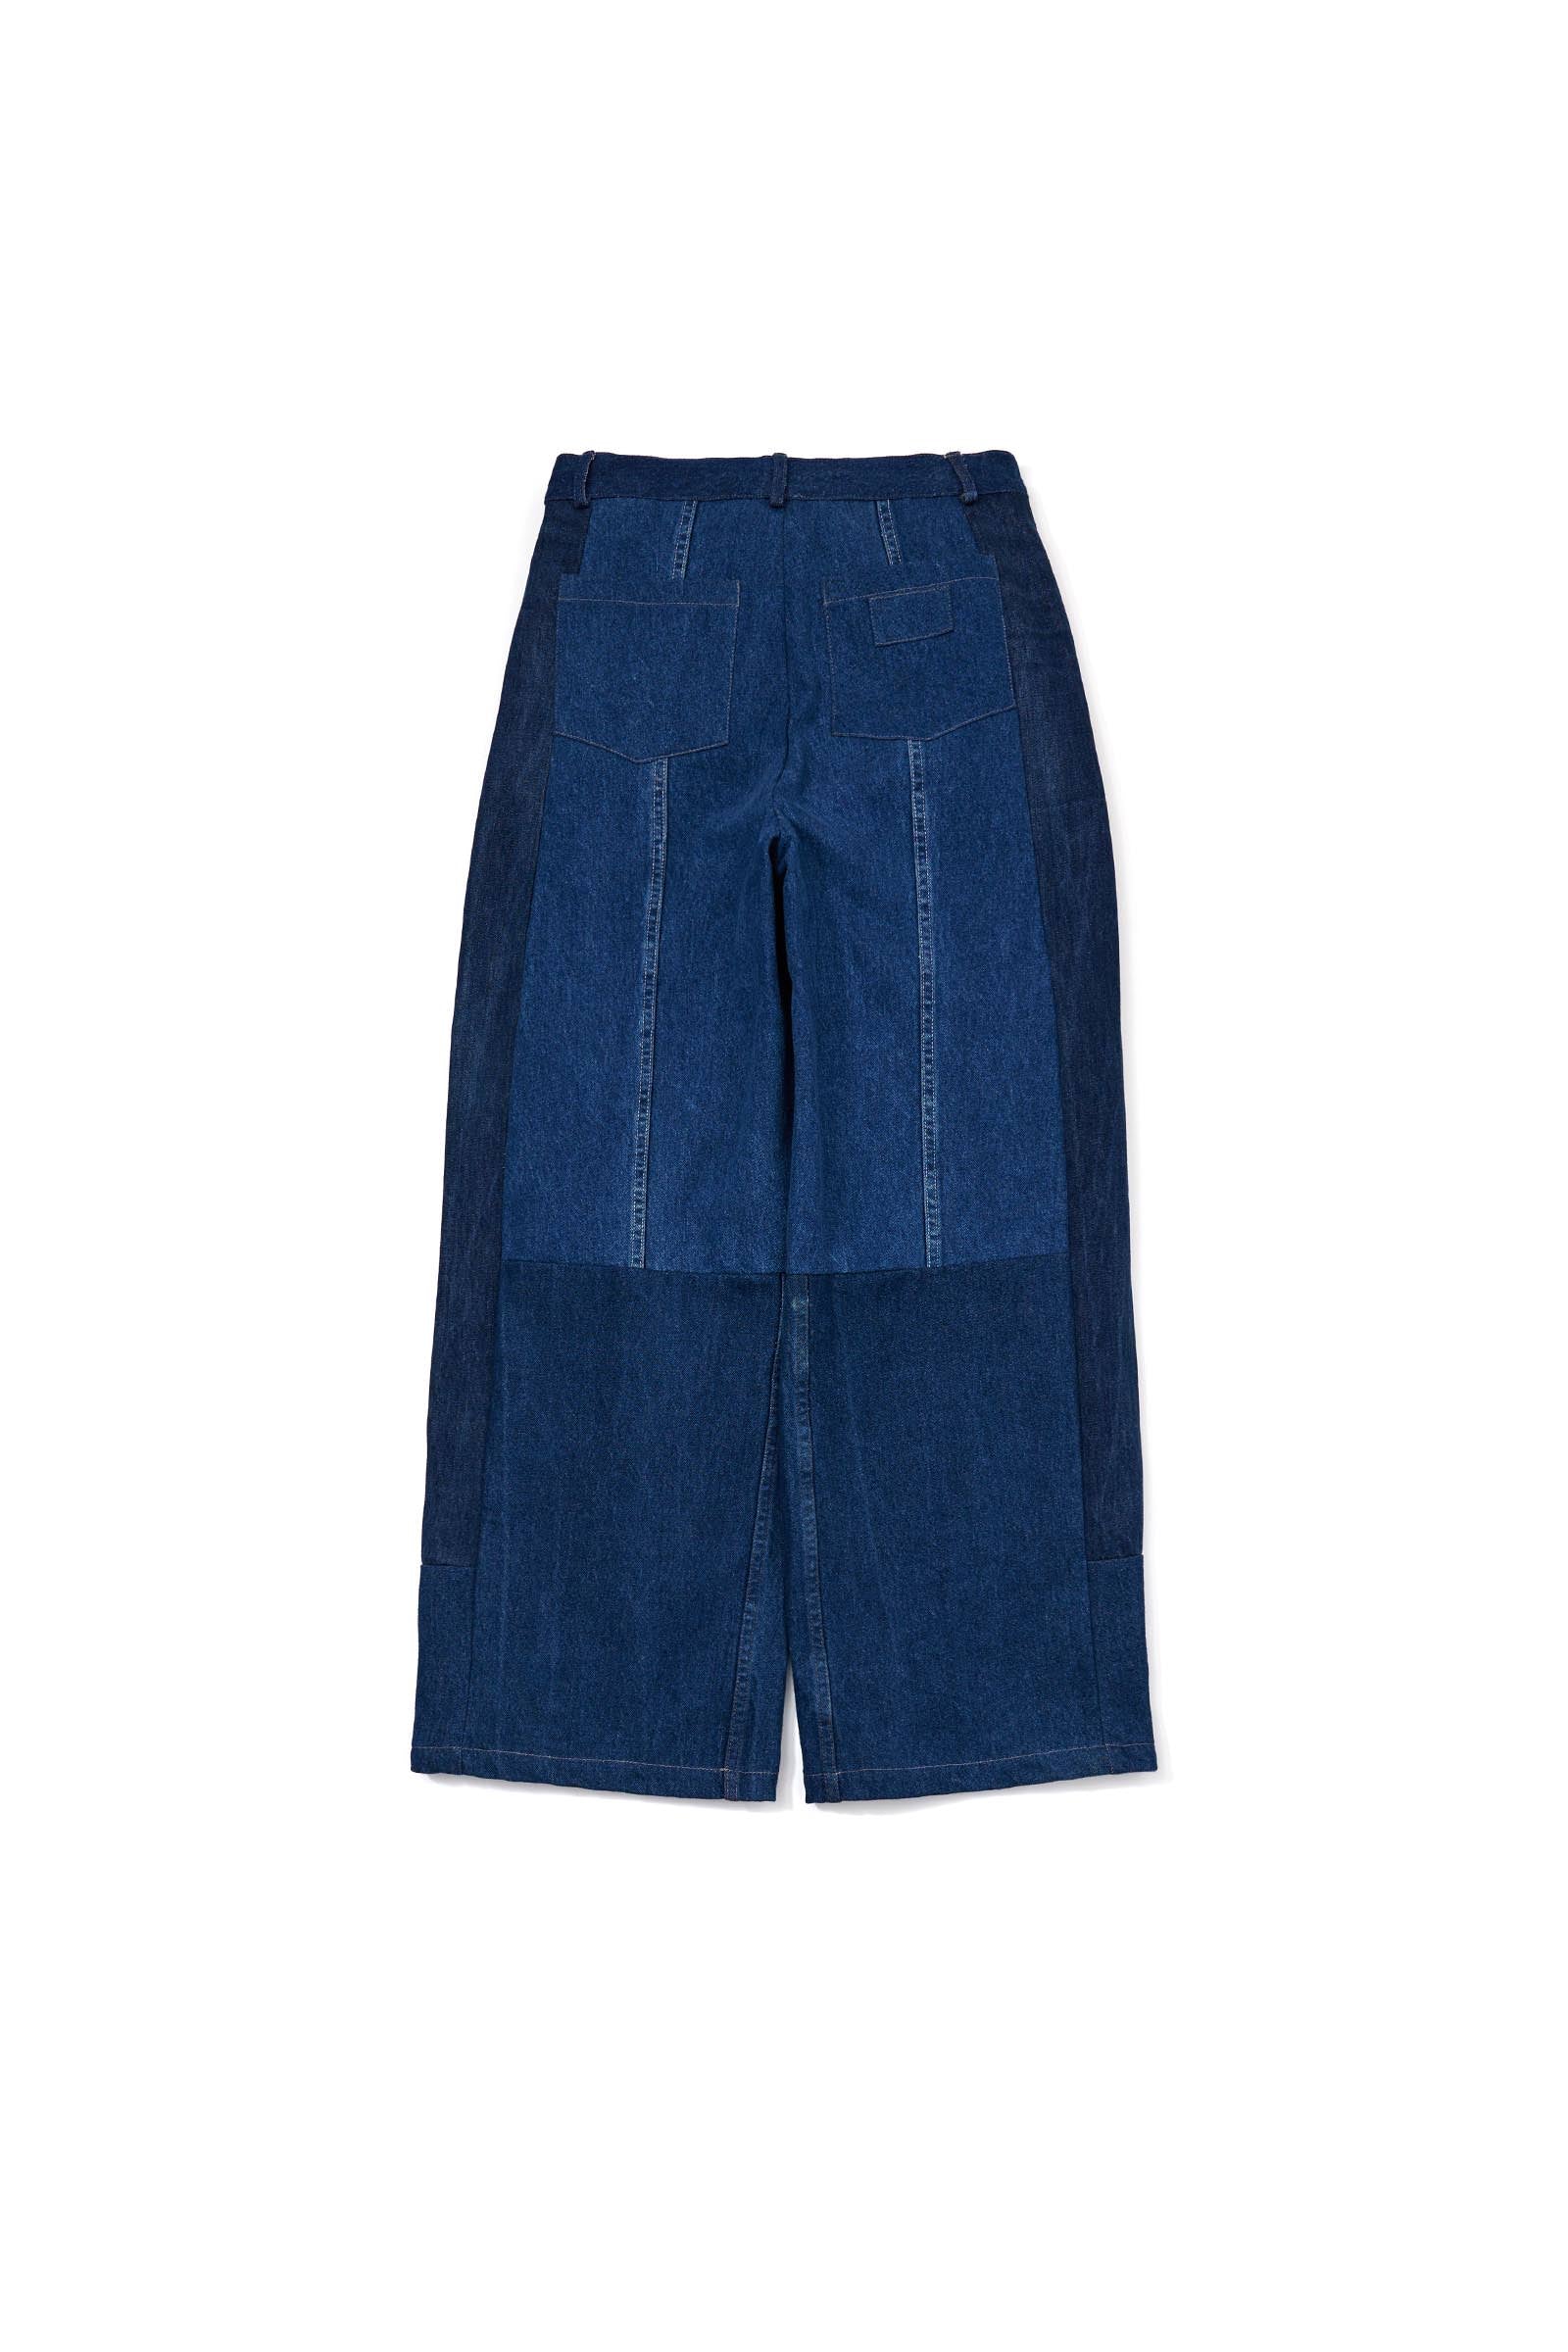 SEEALL / RECONSTRUCTED BOOTS CUT BUGGY PANTS